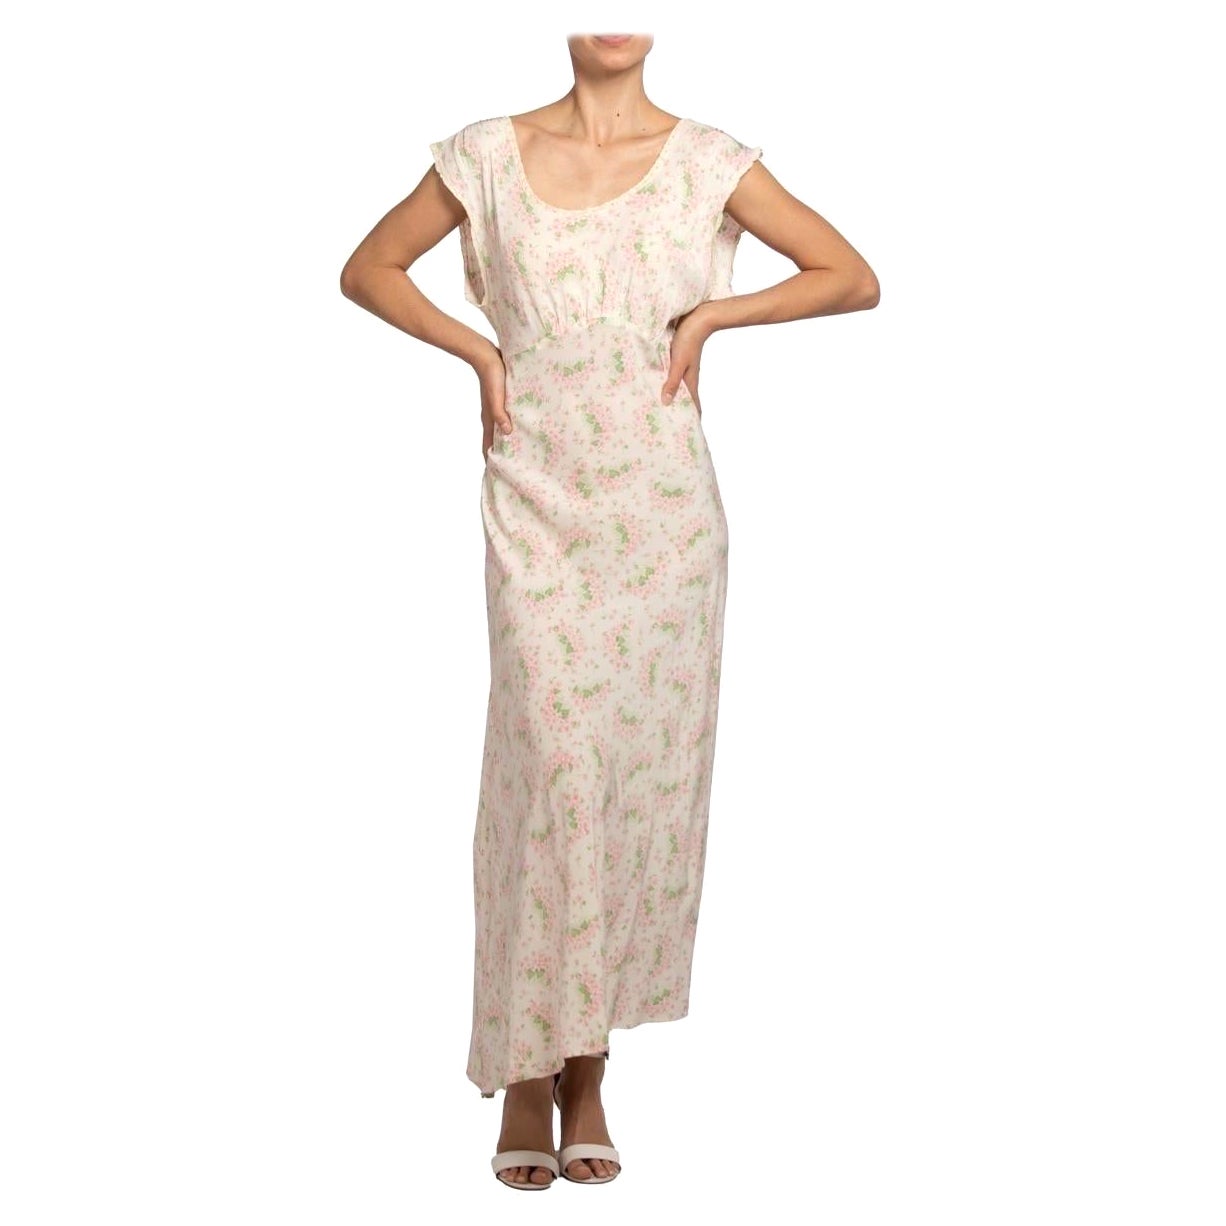 1930S Cream Bias Cut Cold Rayon Negligee With Pink And Green Floral Print For Sale